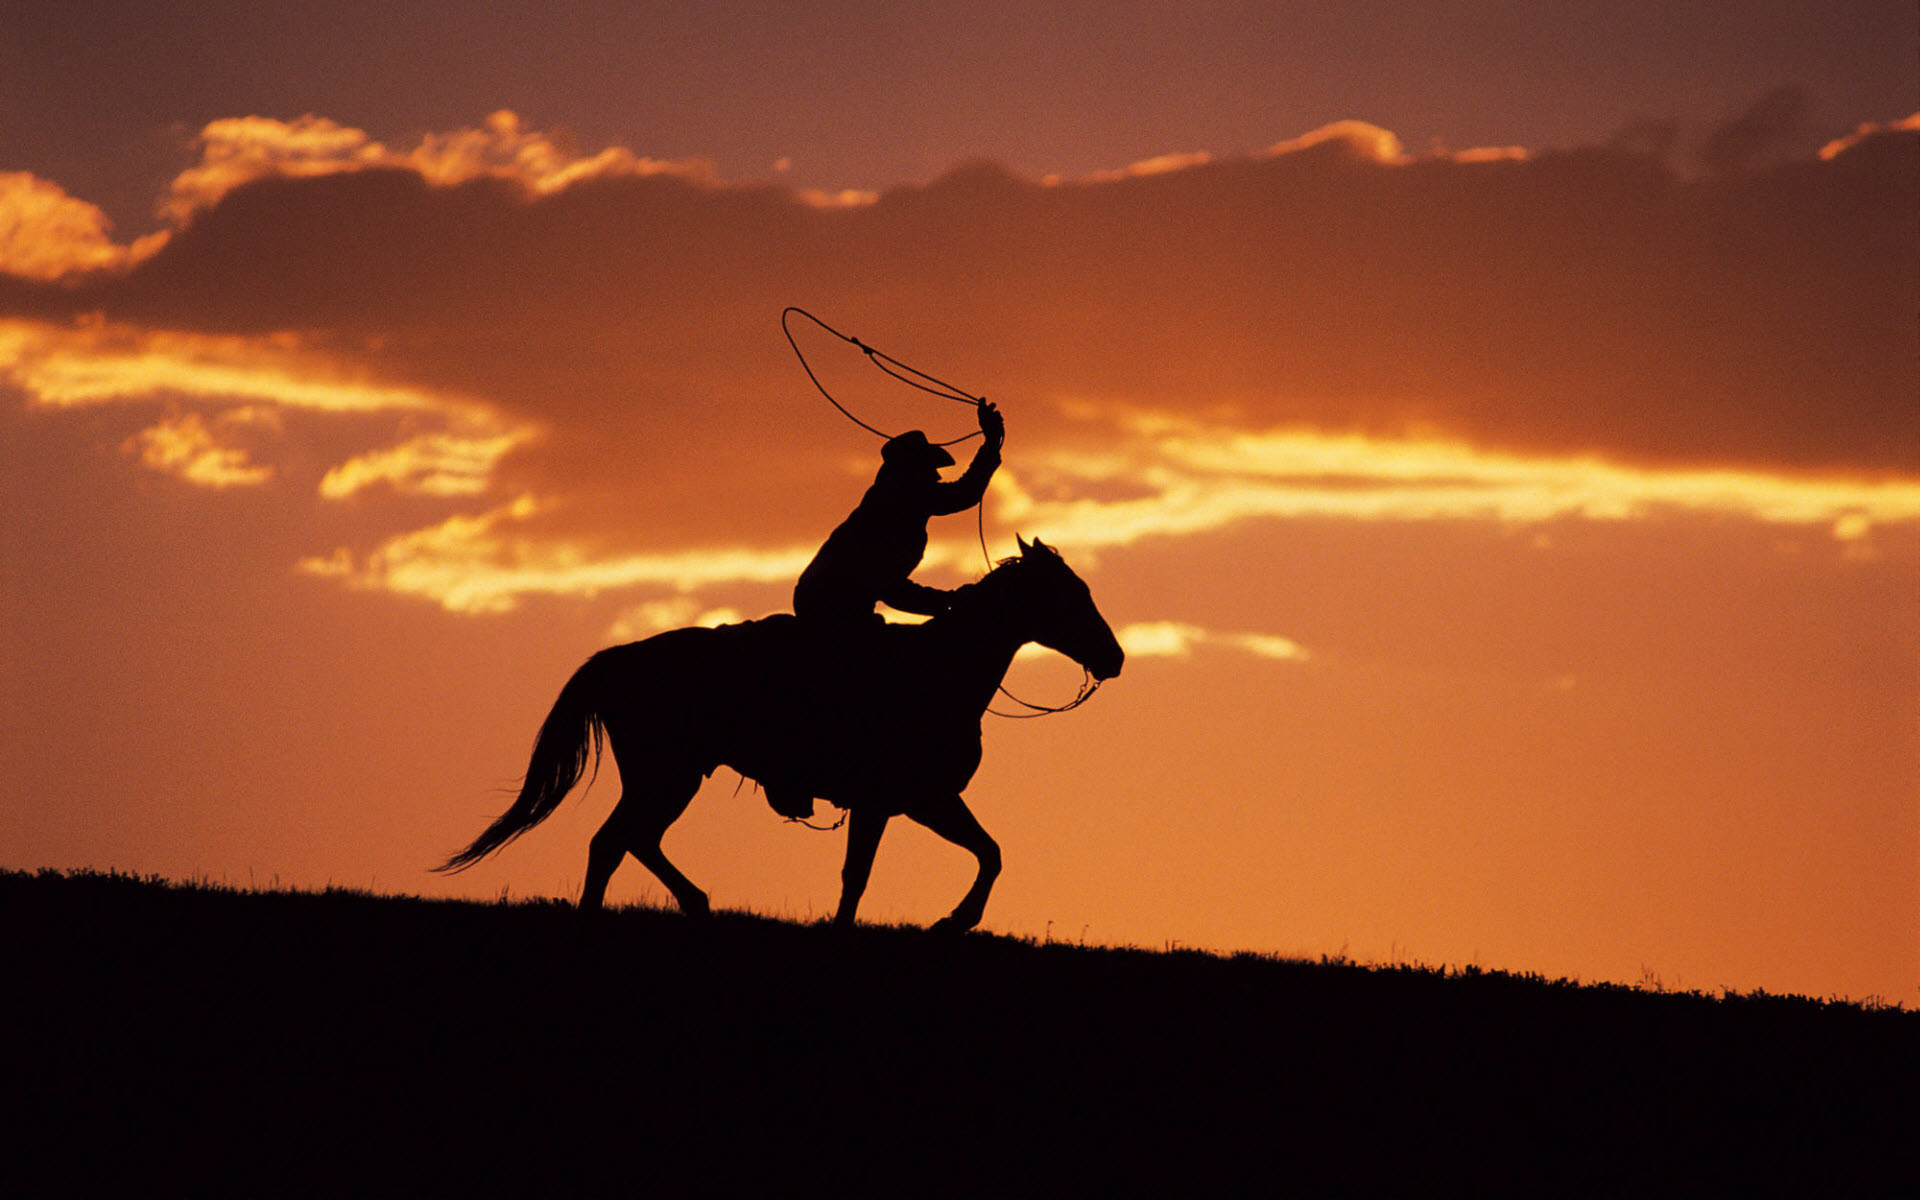 1920x1200 Free Scenery Wallpaper - Includes a Western Cowboy at Sunset, Free in .